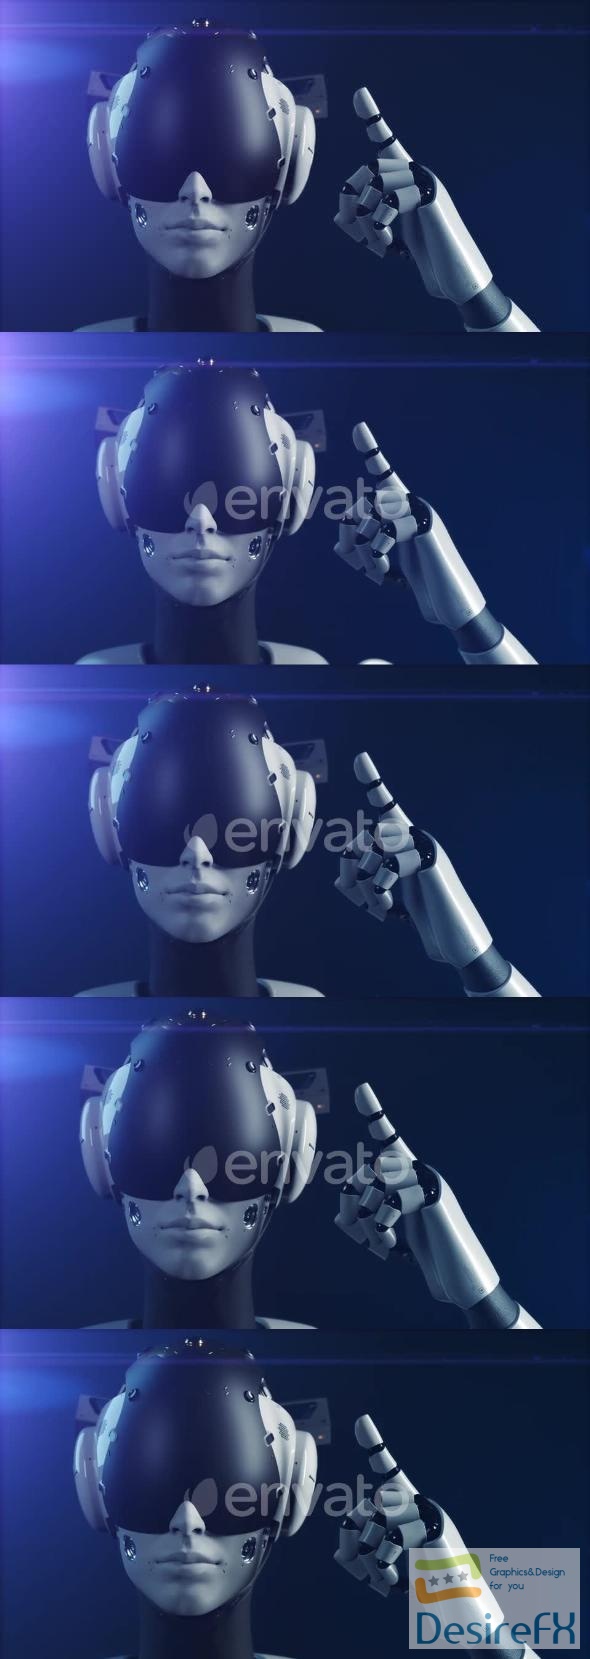 VideoHive portrait of a robot, the robot makes a hand gesture indicating the importance of information 47550783